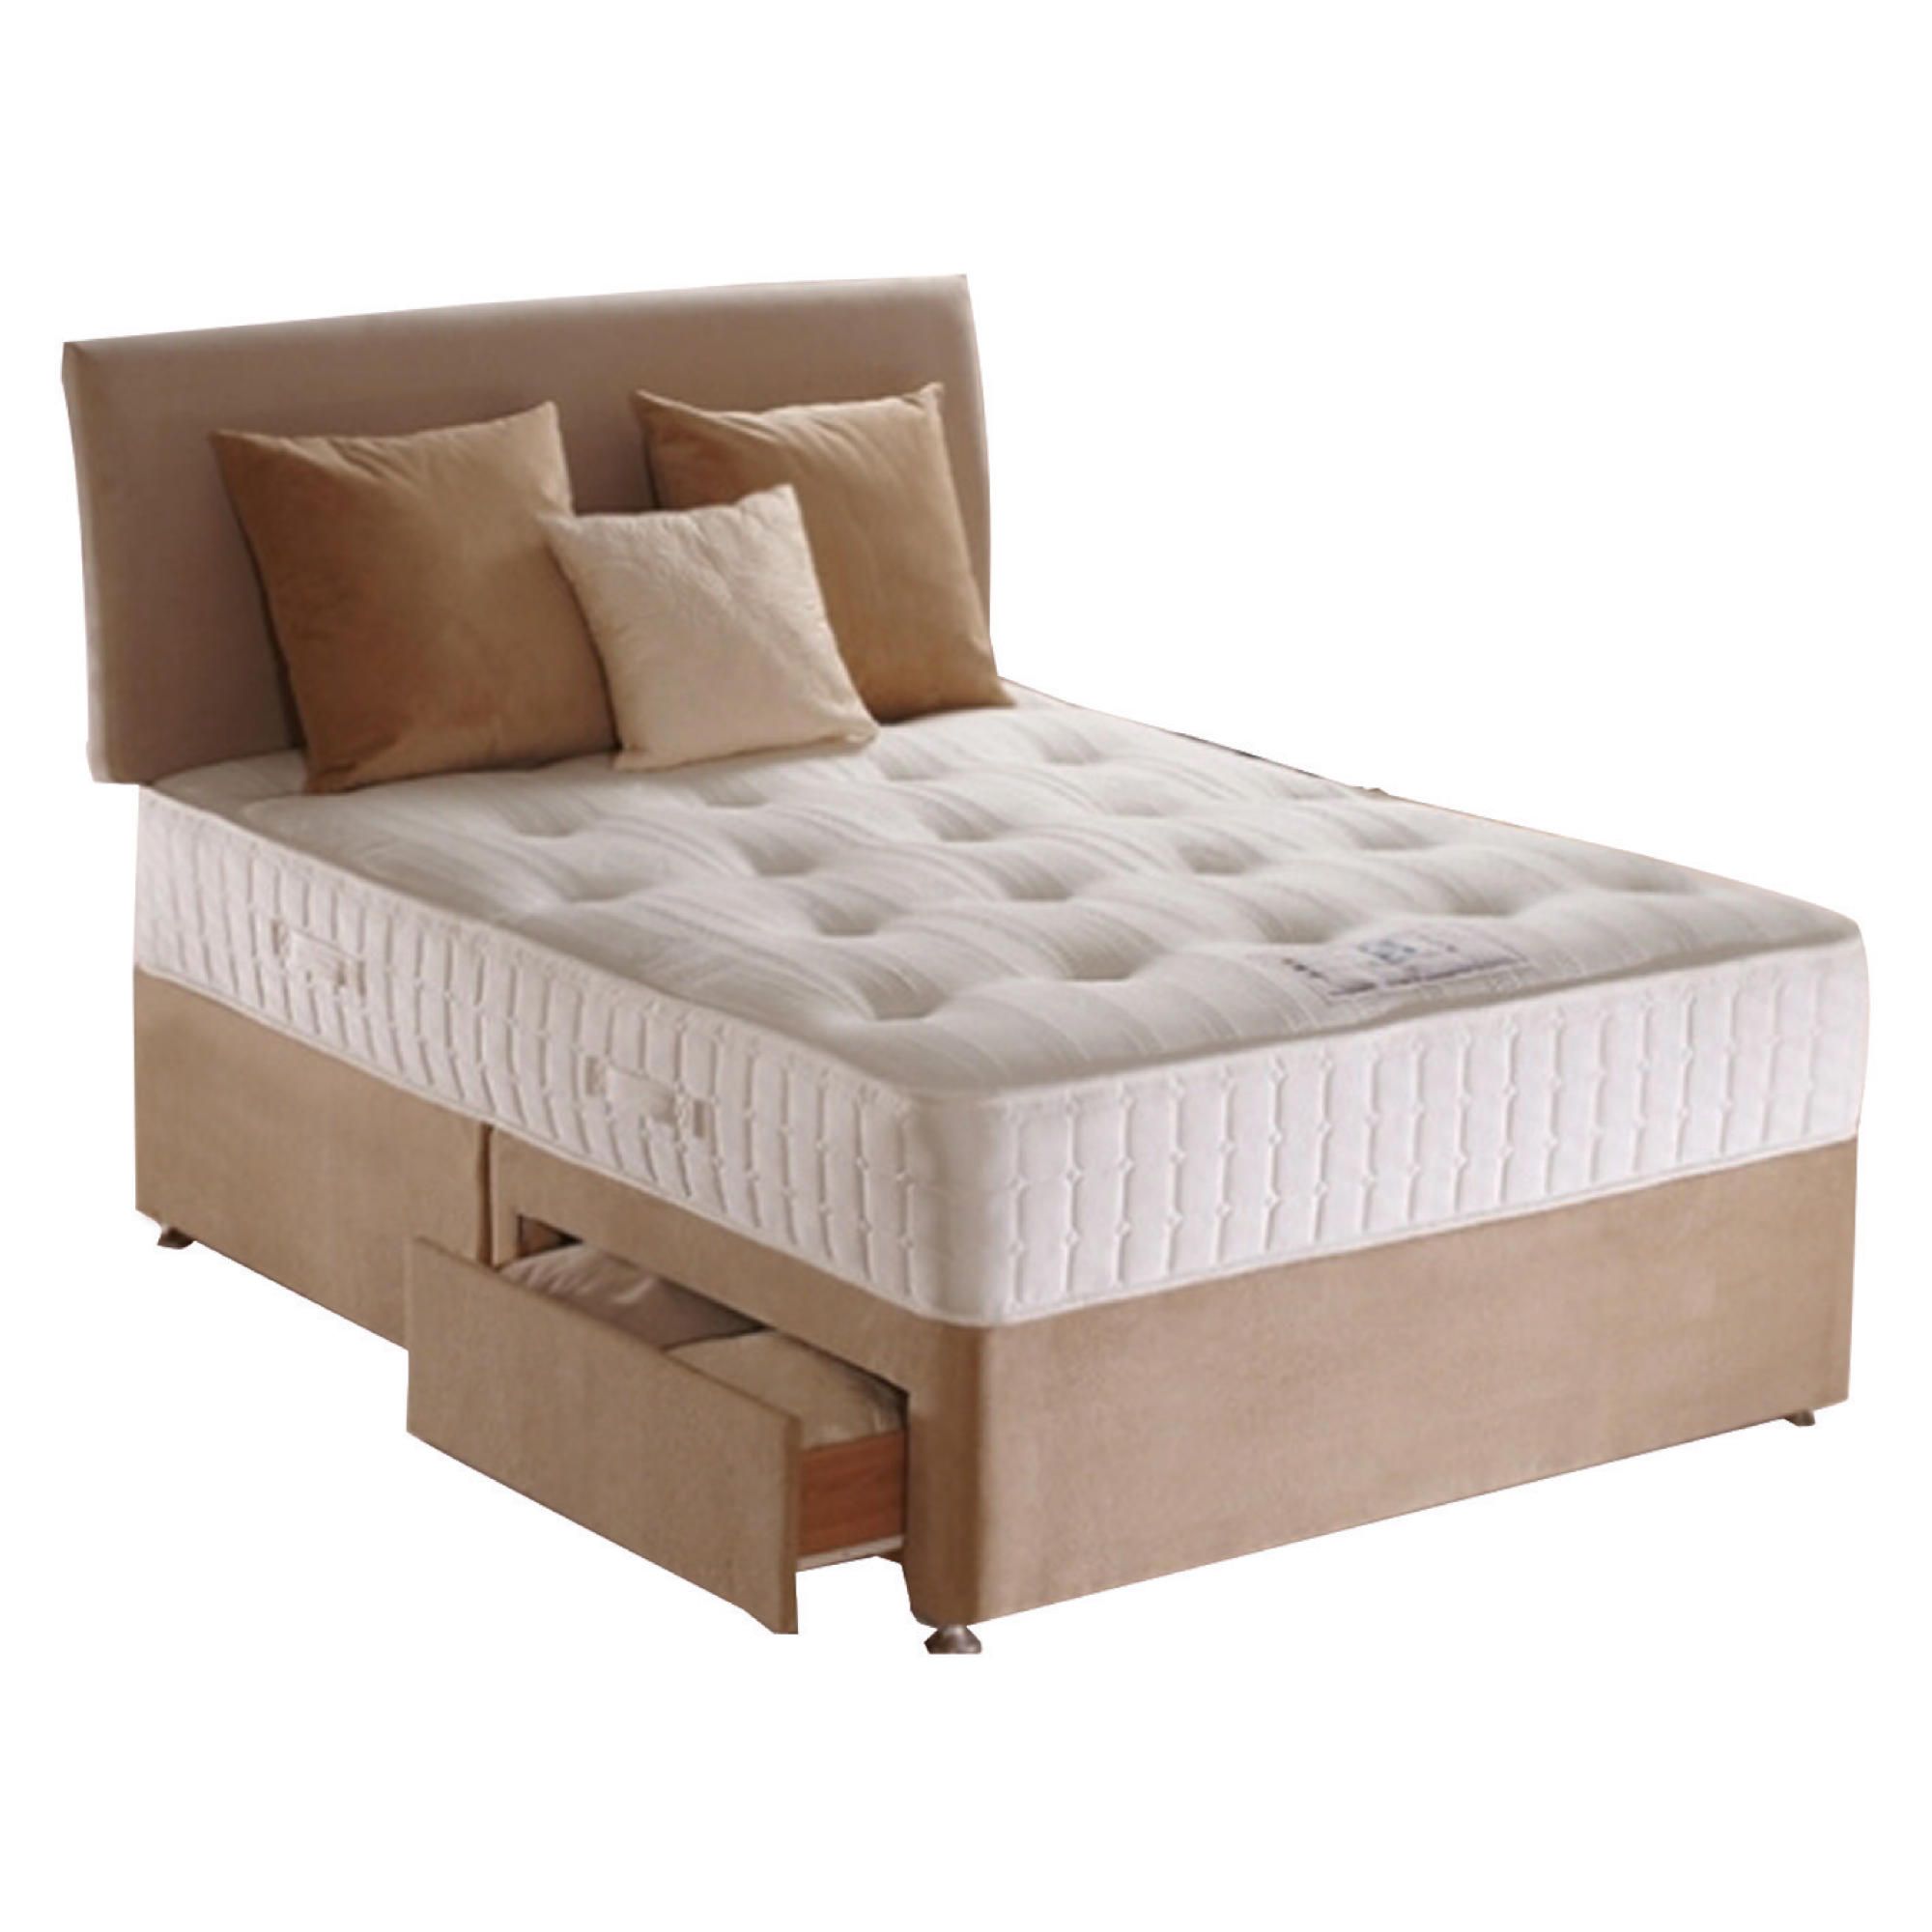 Sealy Purity Pocket Ortho King 2 Drawer Divan Bed at Tesco Direct